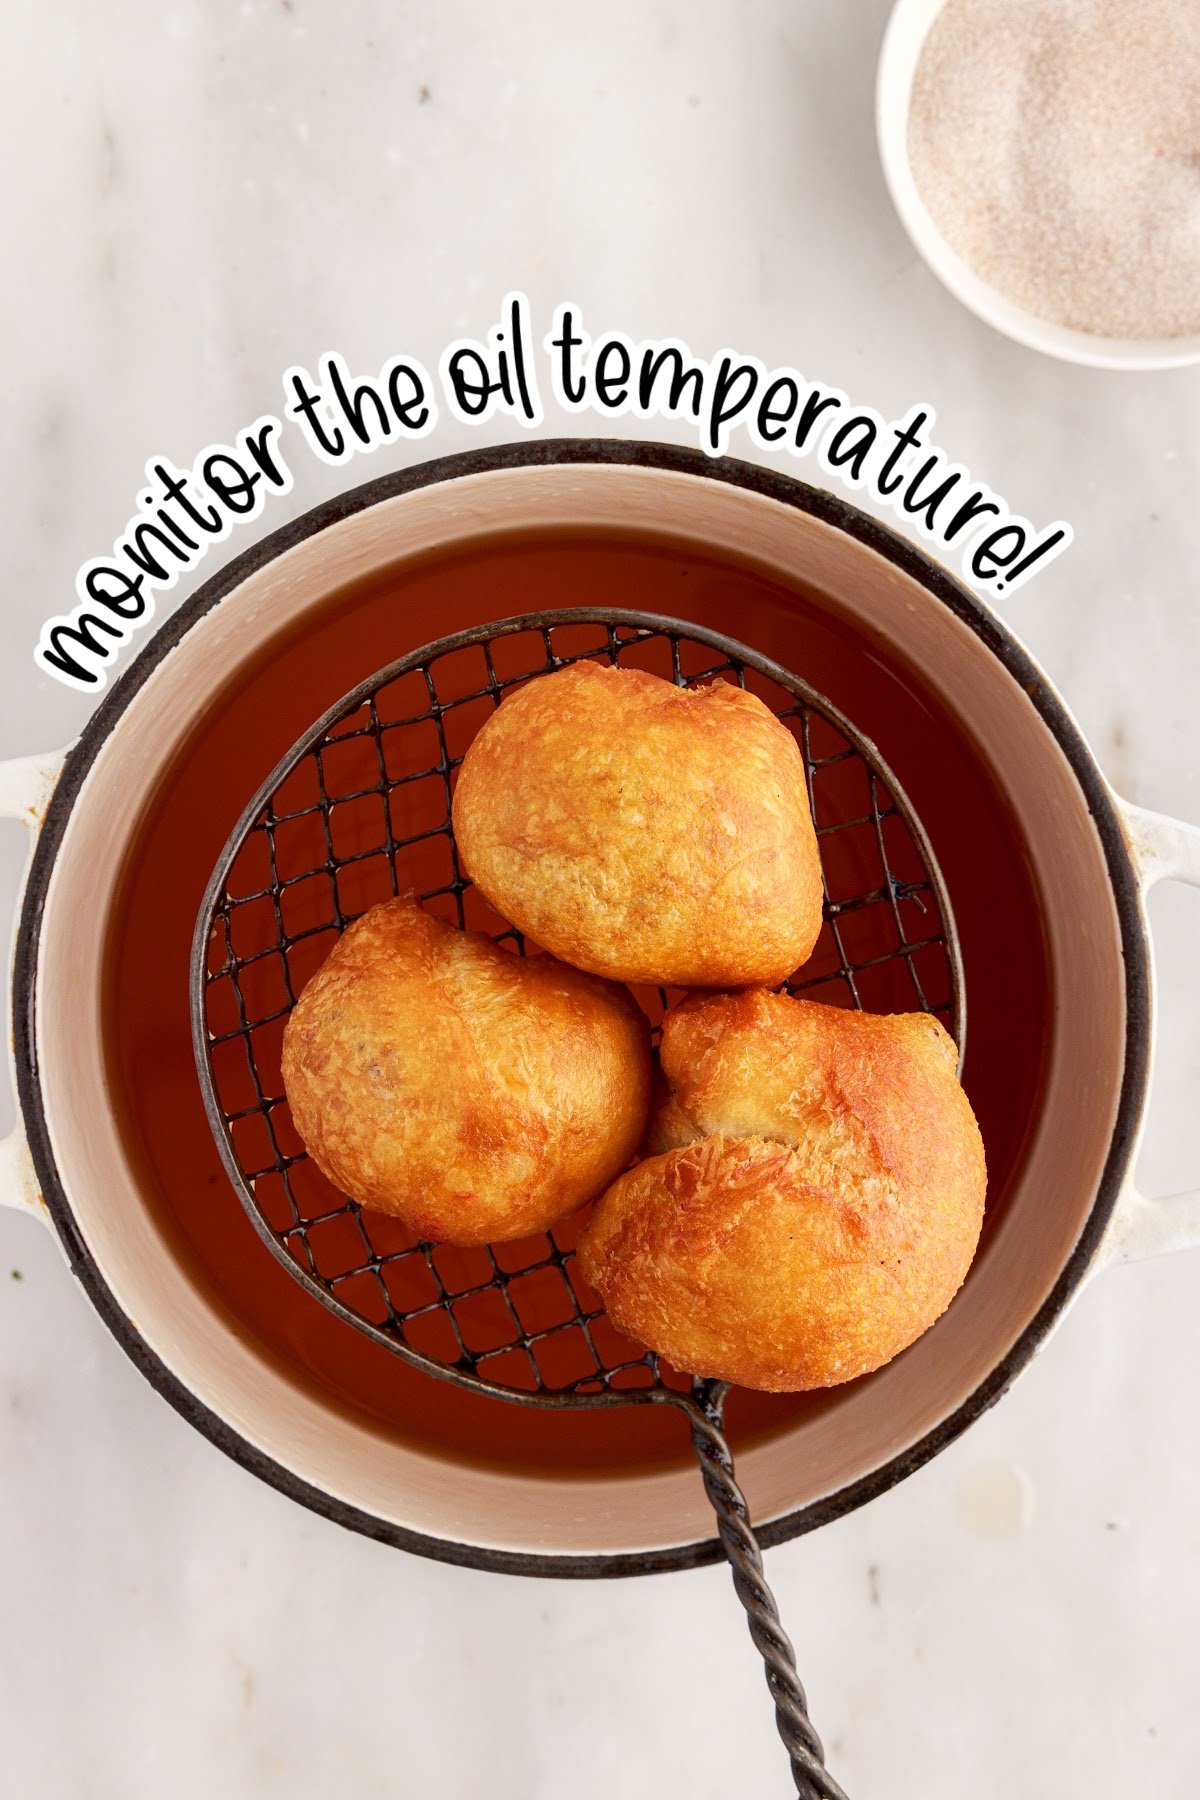 Three Apple Pie Bombs on a wire strainer over oil with text overlay.